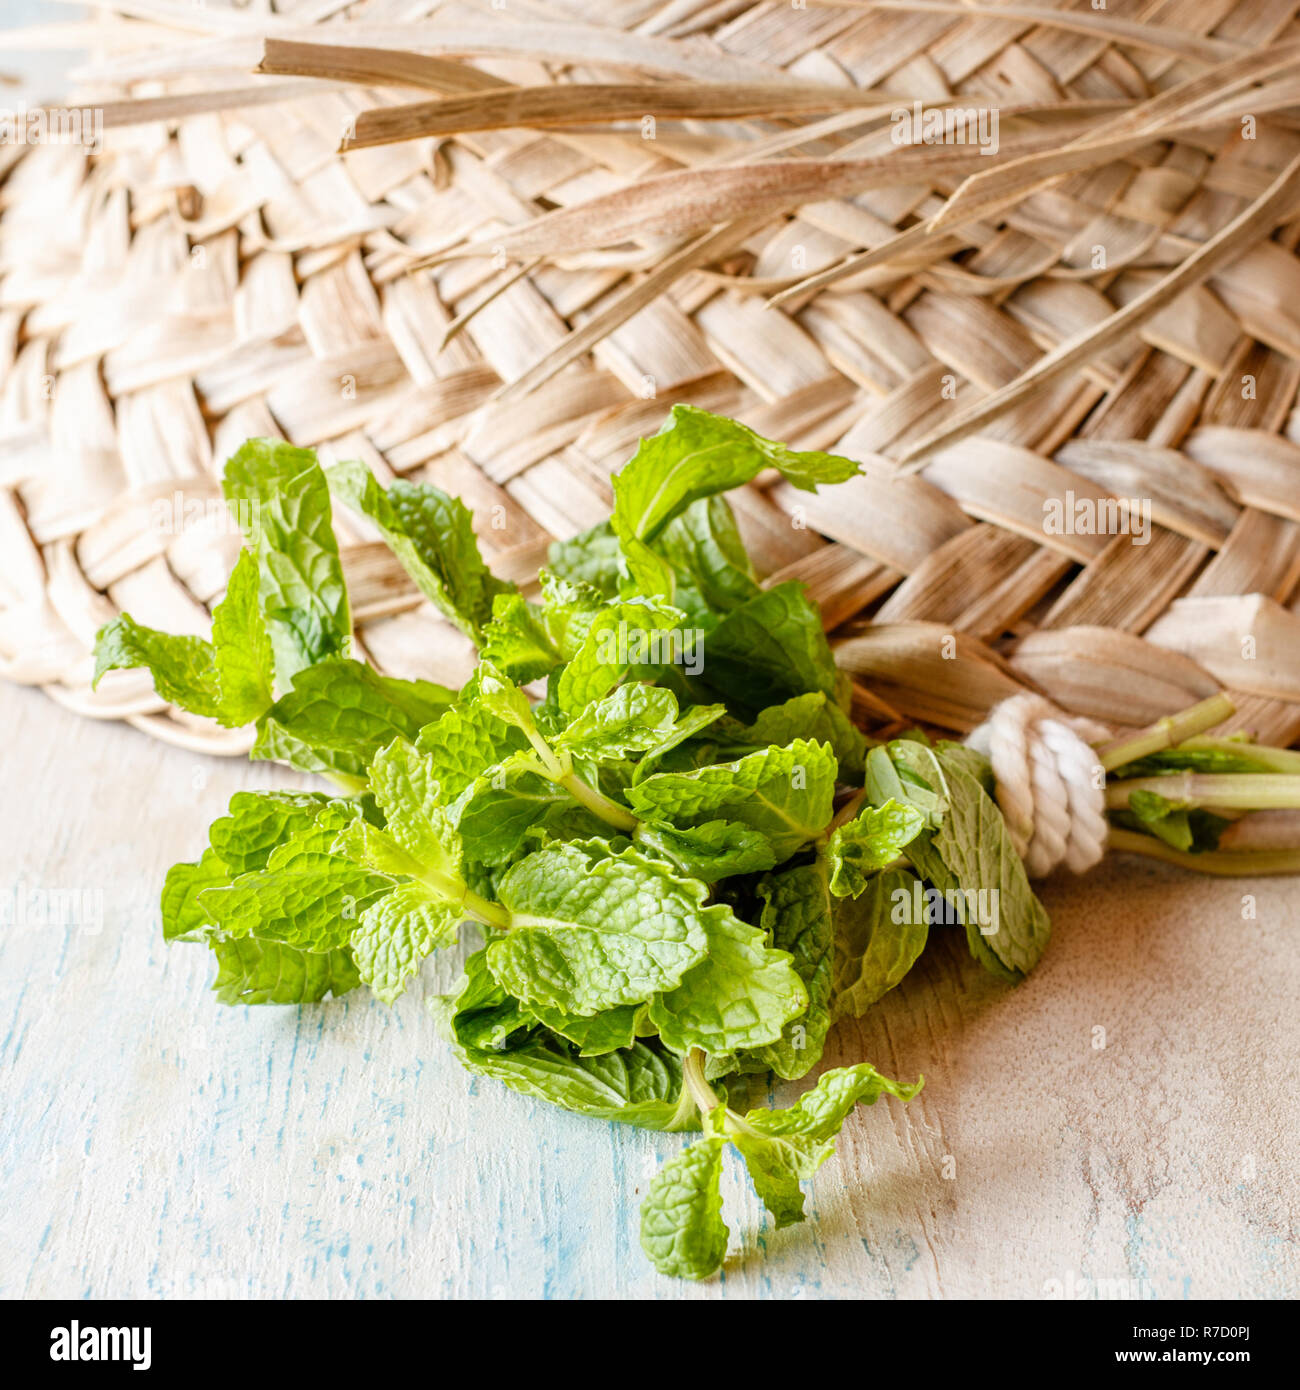 Fresh mint  and a straw hat on a wooden white and blue washed surface. Square image. Concept of gardening. Stock Photo